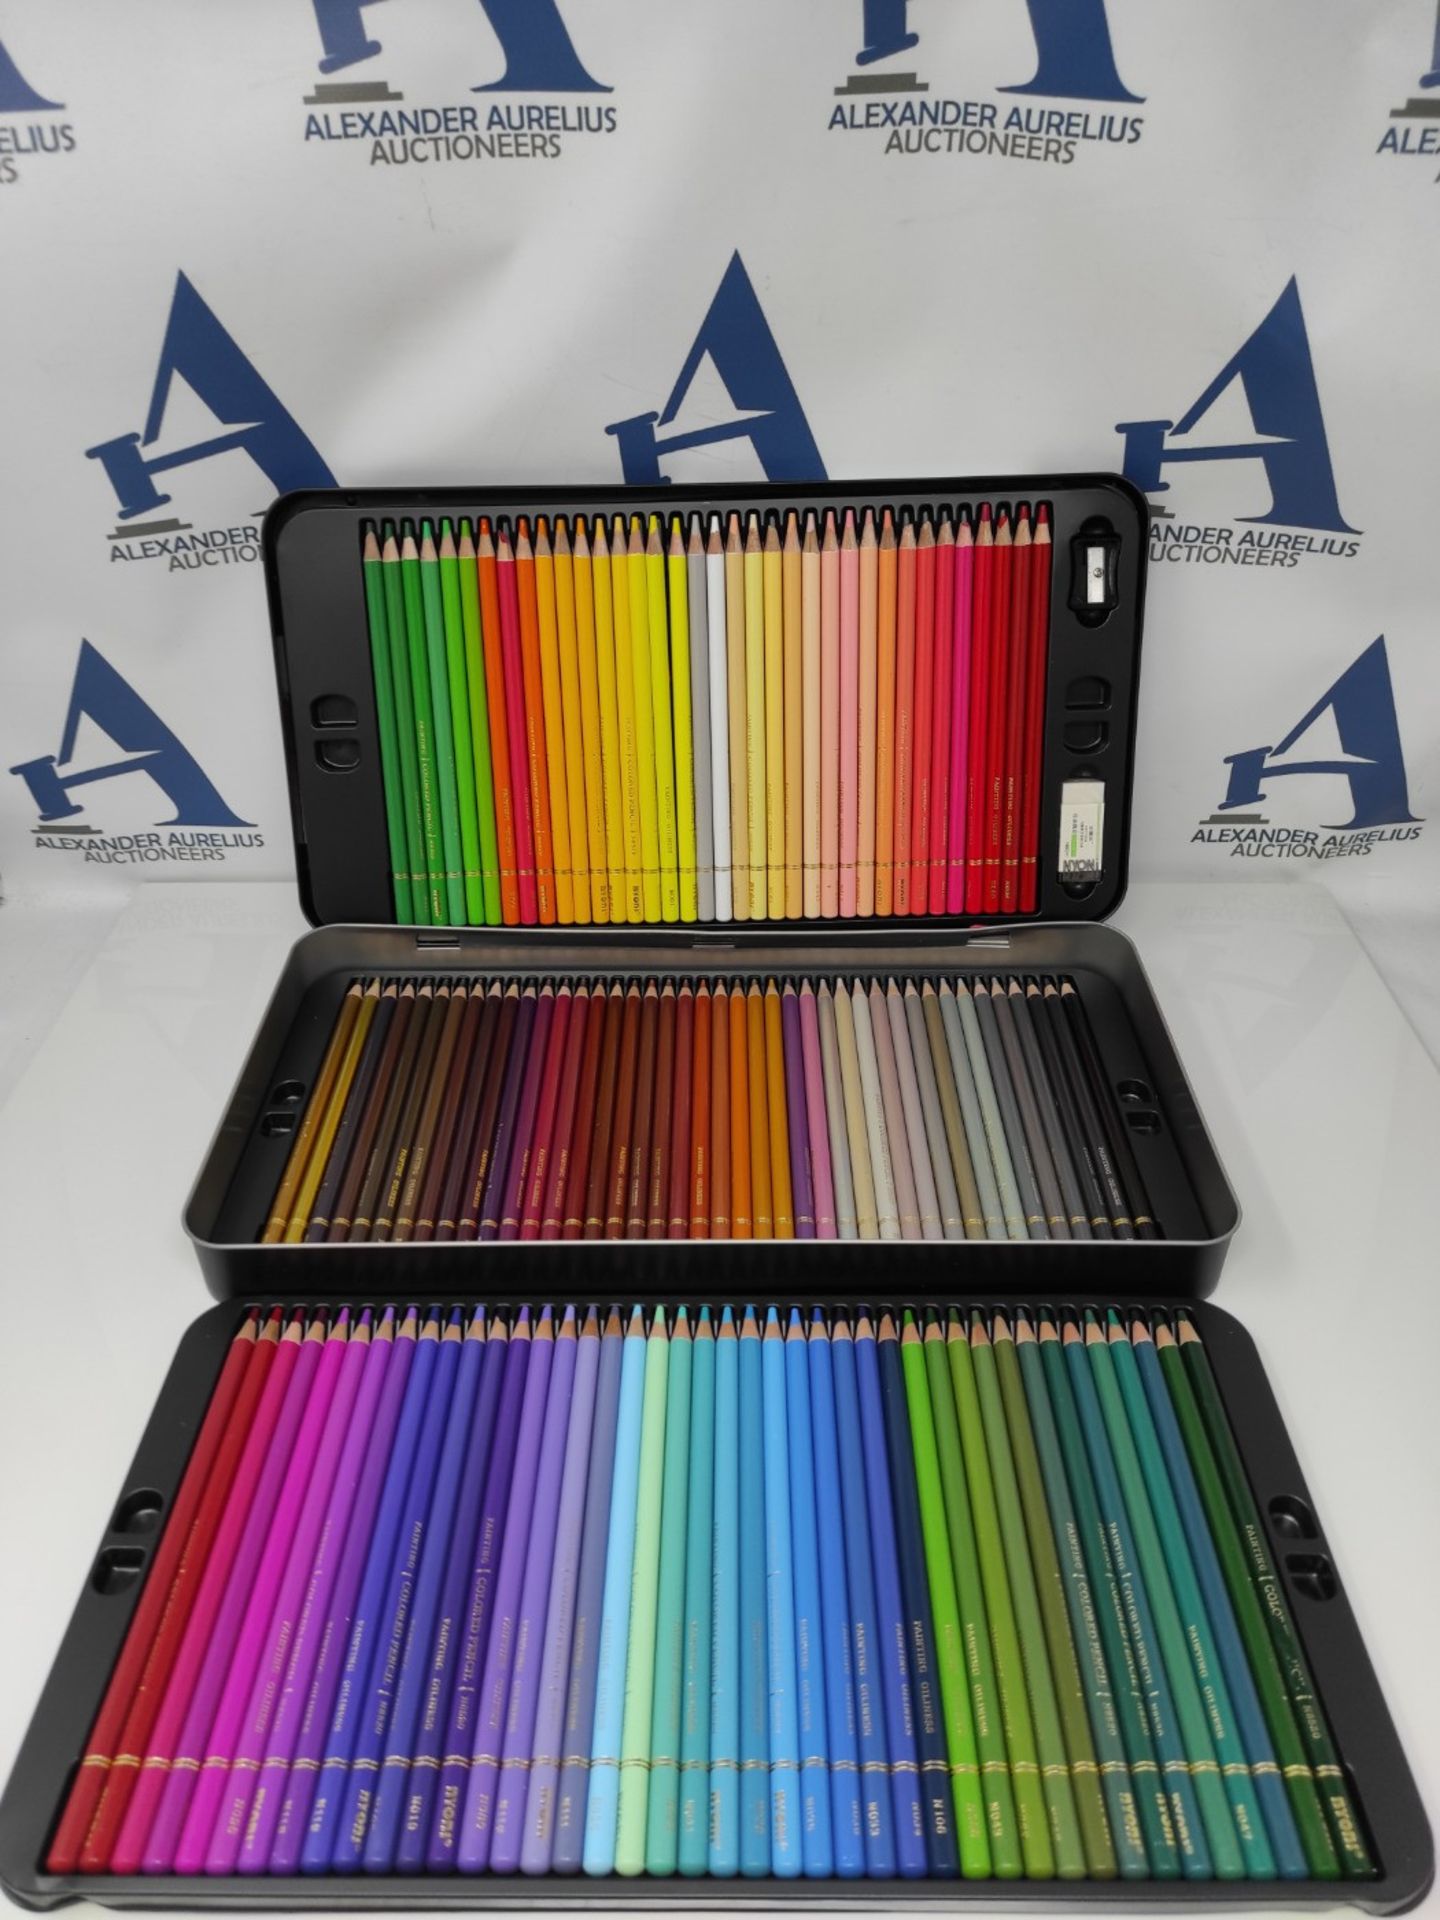 RRP £59.00 Acropaq - 120 oil-based colored pencils - Numbered Pencils - Set of 120 bright colors - Bild 3 aus 3